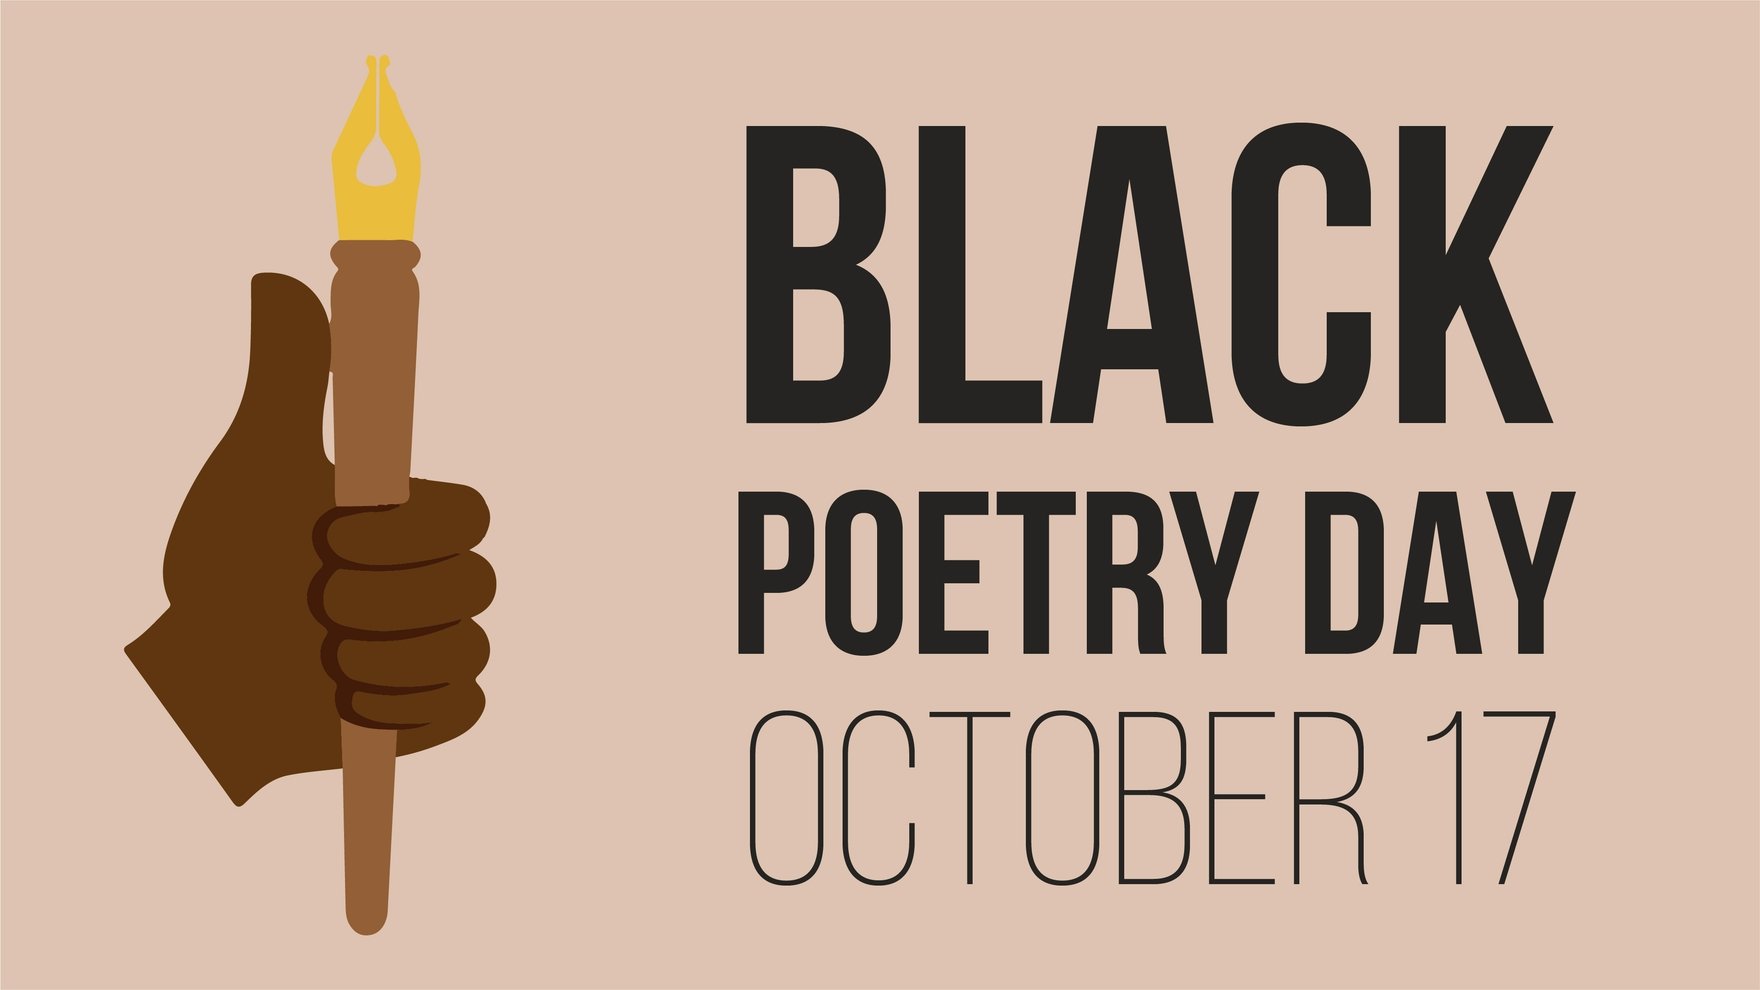 High Resolution Black Poetry Day Background